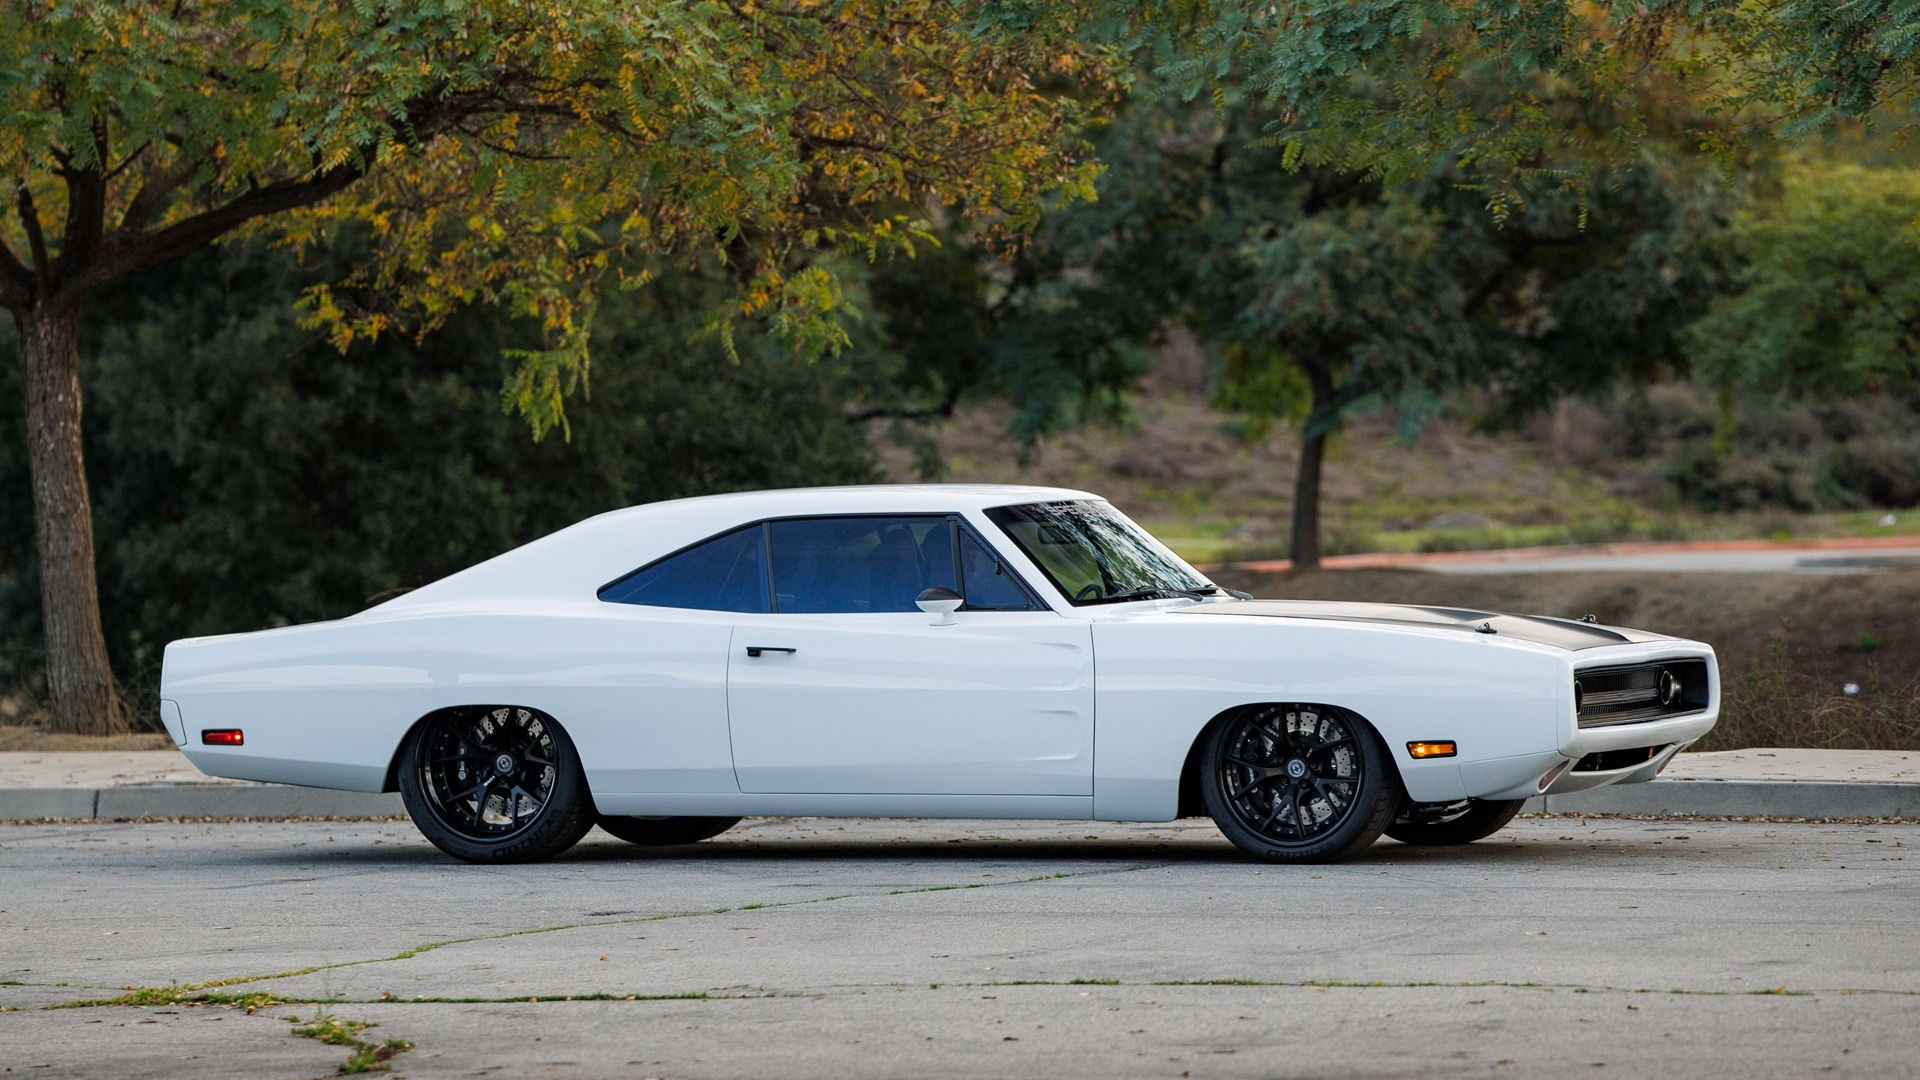 SpeedKore Ghost 1970 Dodge Charger